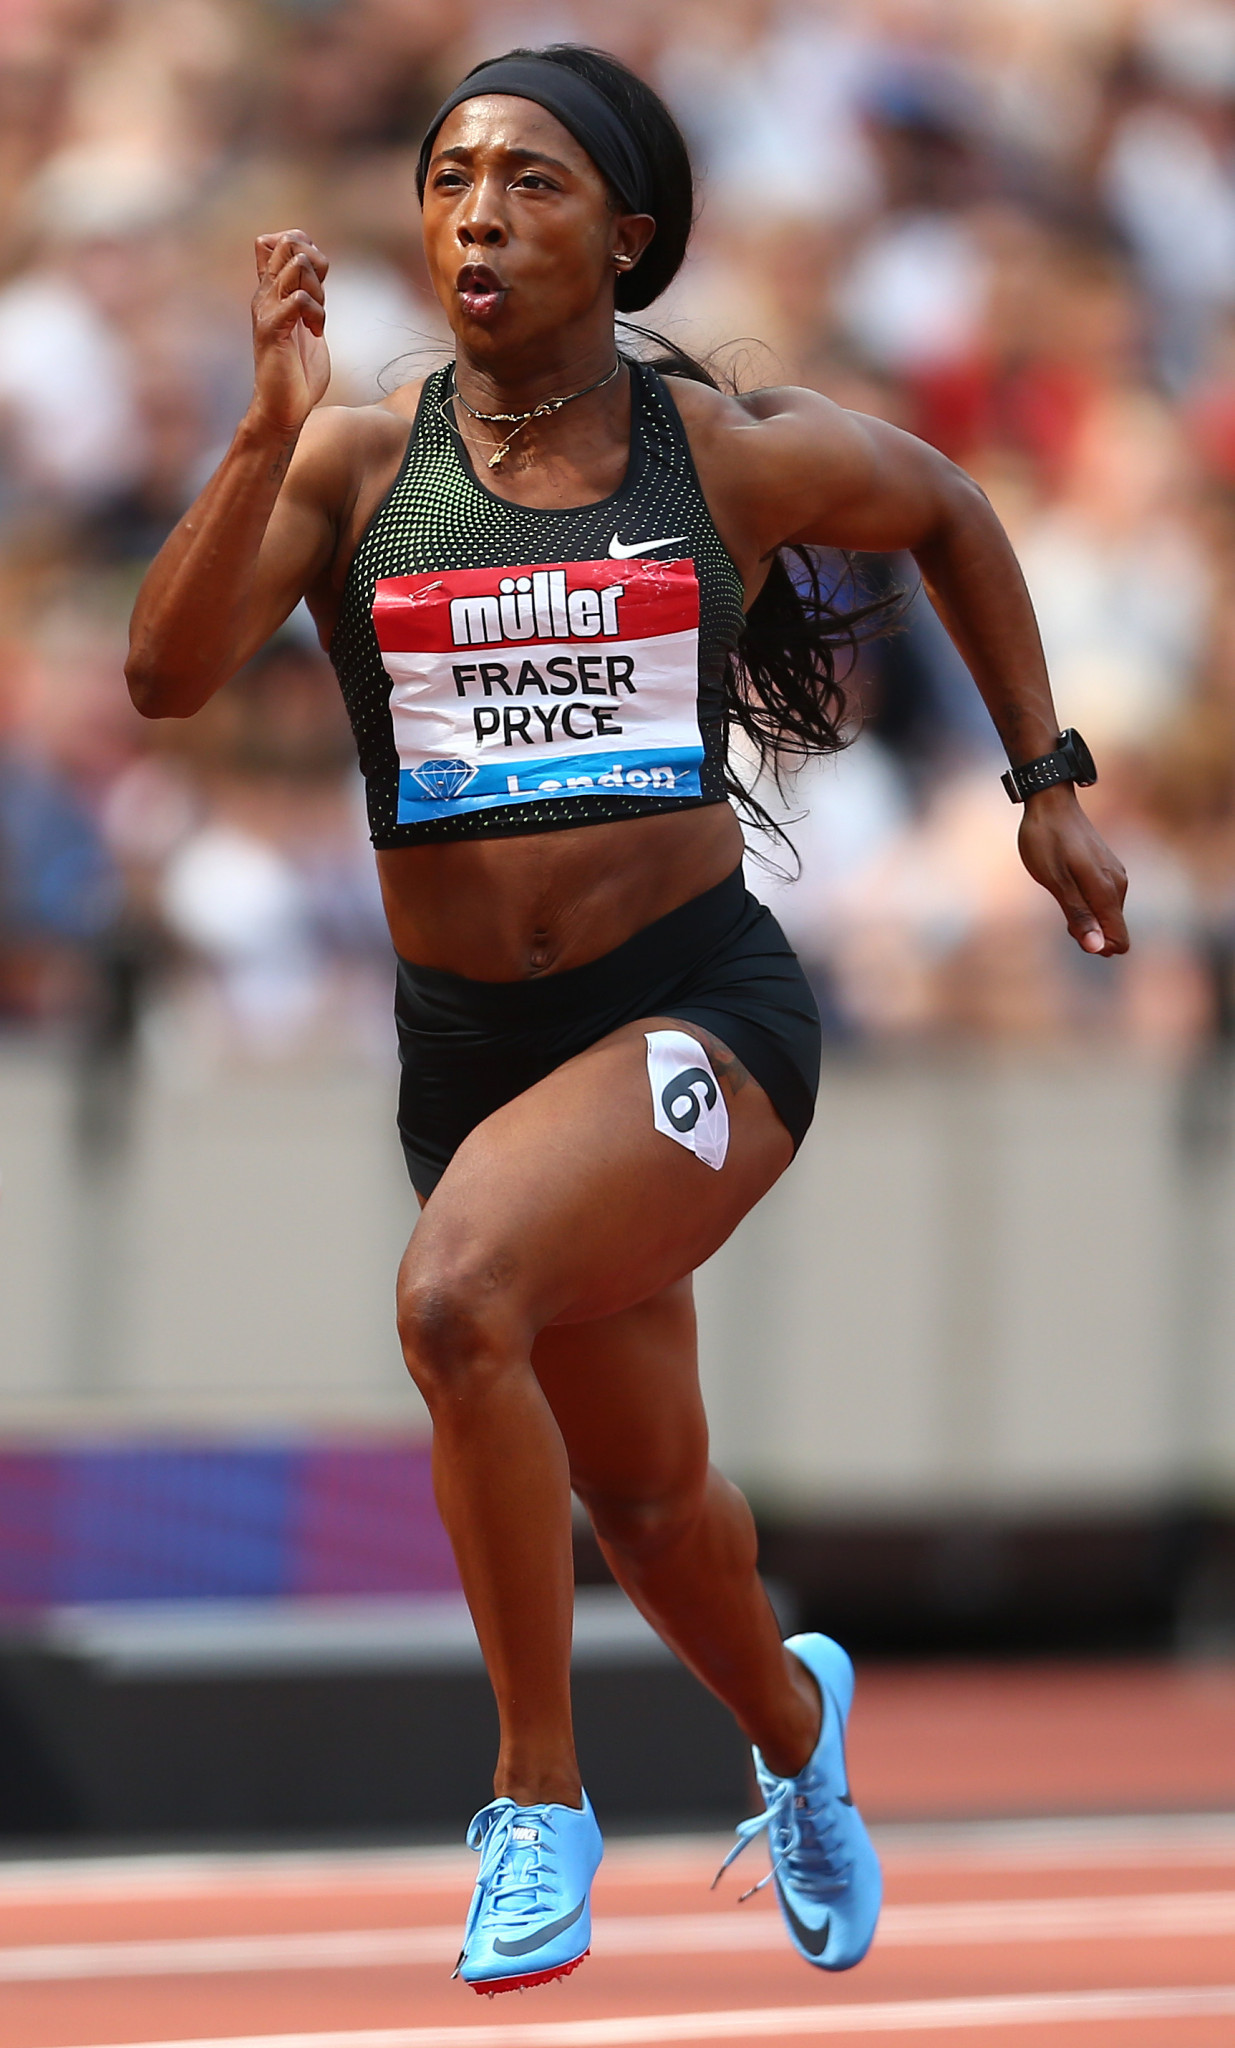 Jamaica's resurgent 2008 and 2012 Olympic 100 metres champion Shelly-Ann Fraser-Pryce will contest a talent-stacked race over that distance in tomorrow's IAAF Diamond League meeting in Stanford, California ©Getty Images